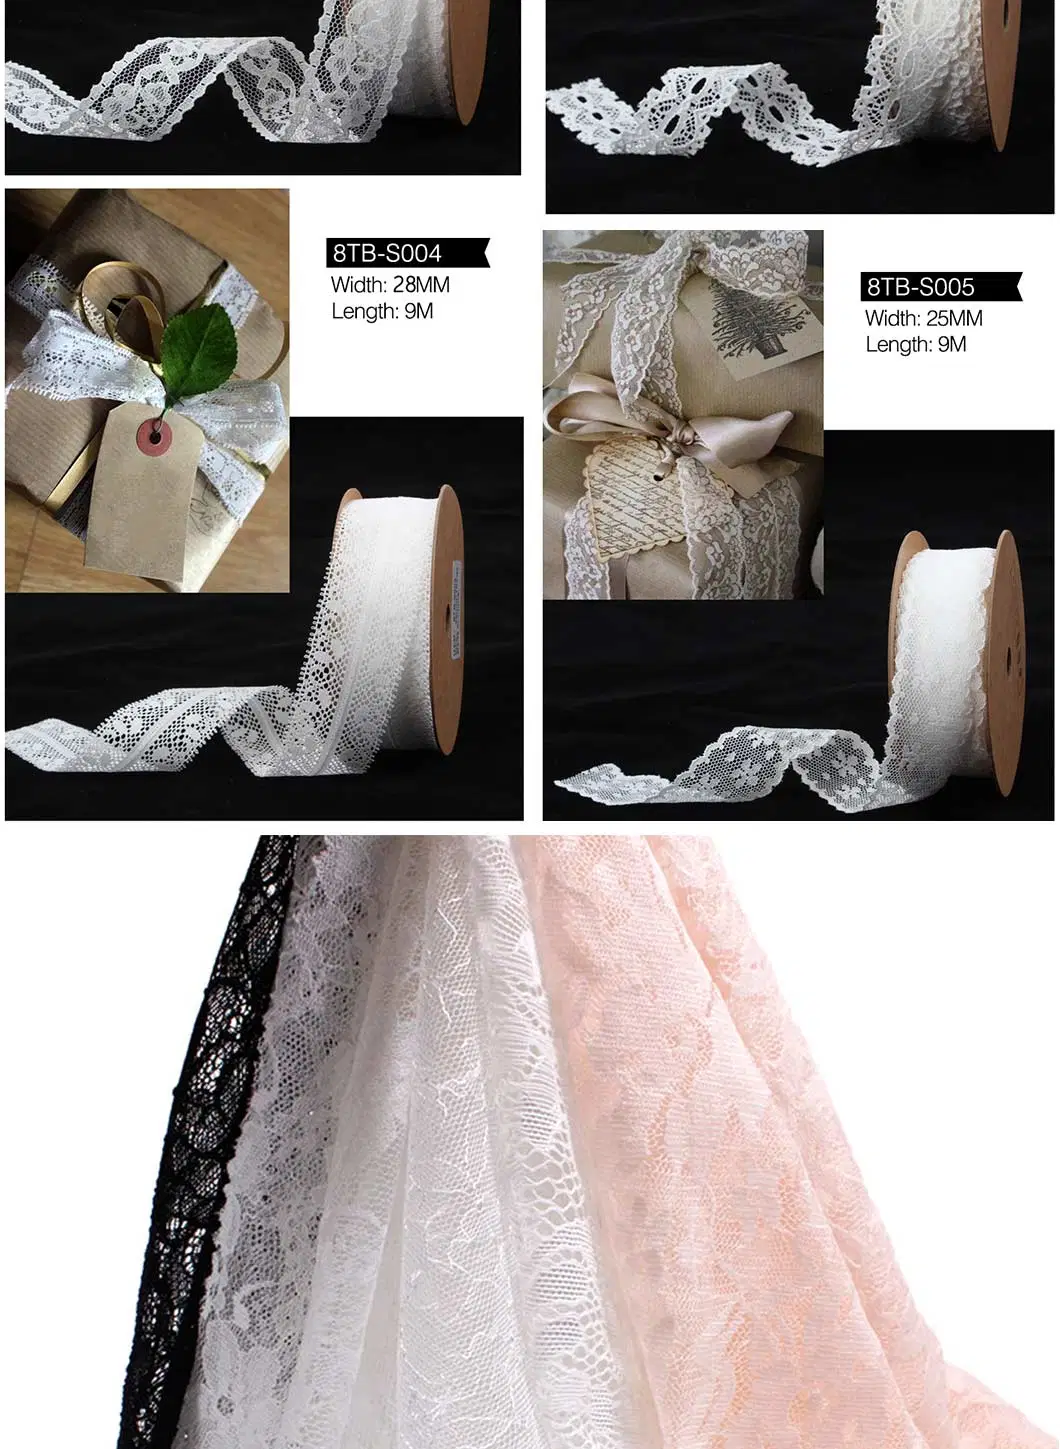 China Factory Directly Elegant Jacquard Lace Fabric for Girls′ Dress/Cheap Fabric